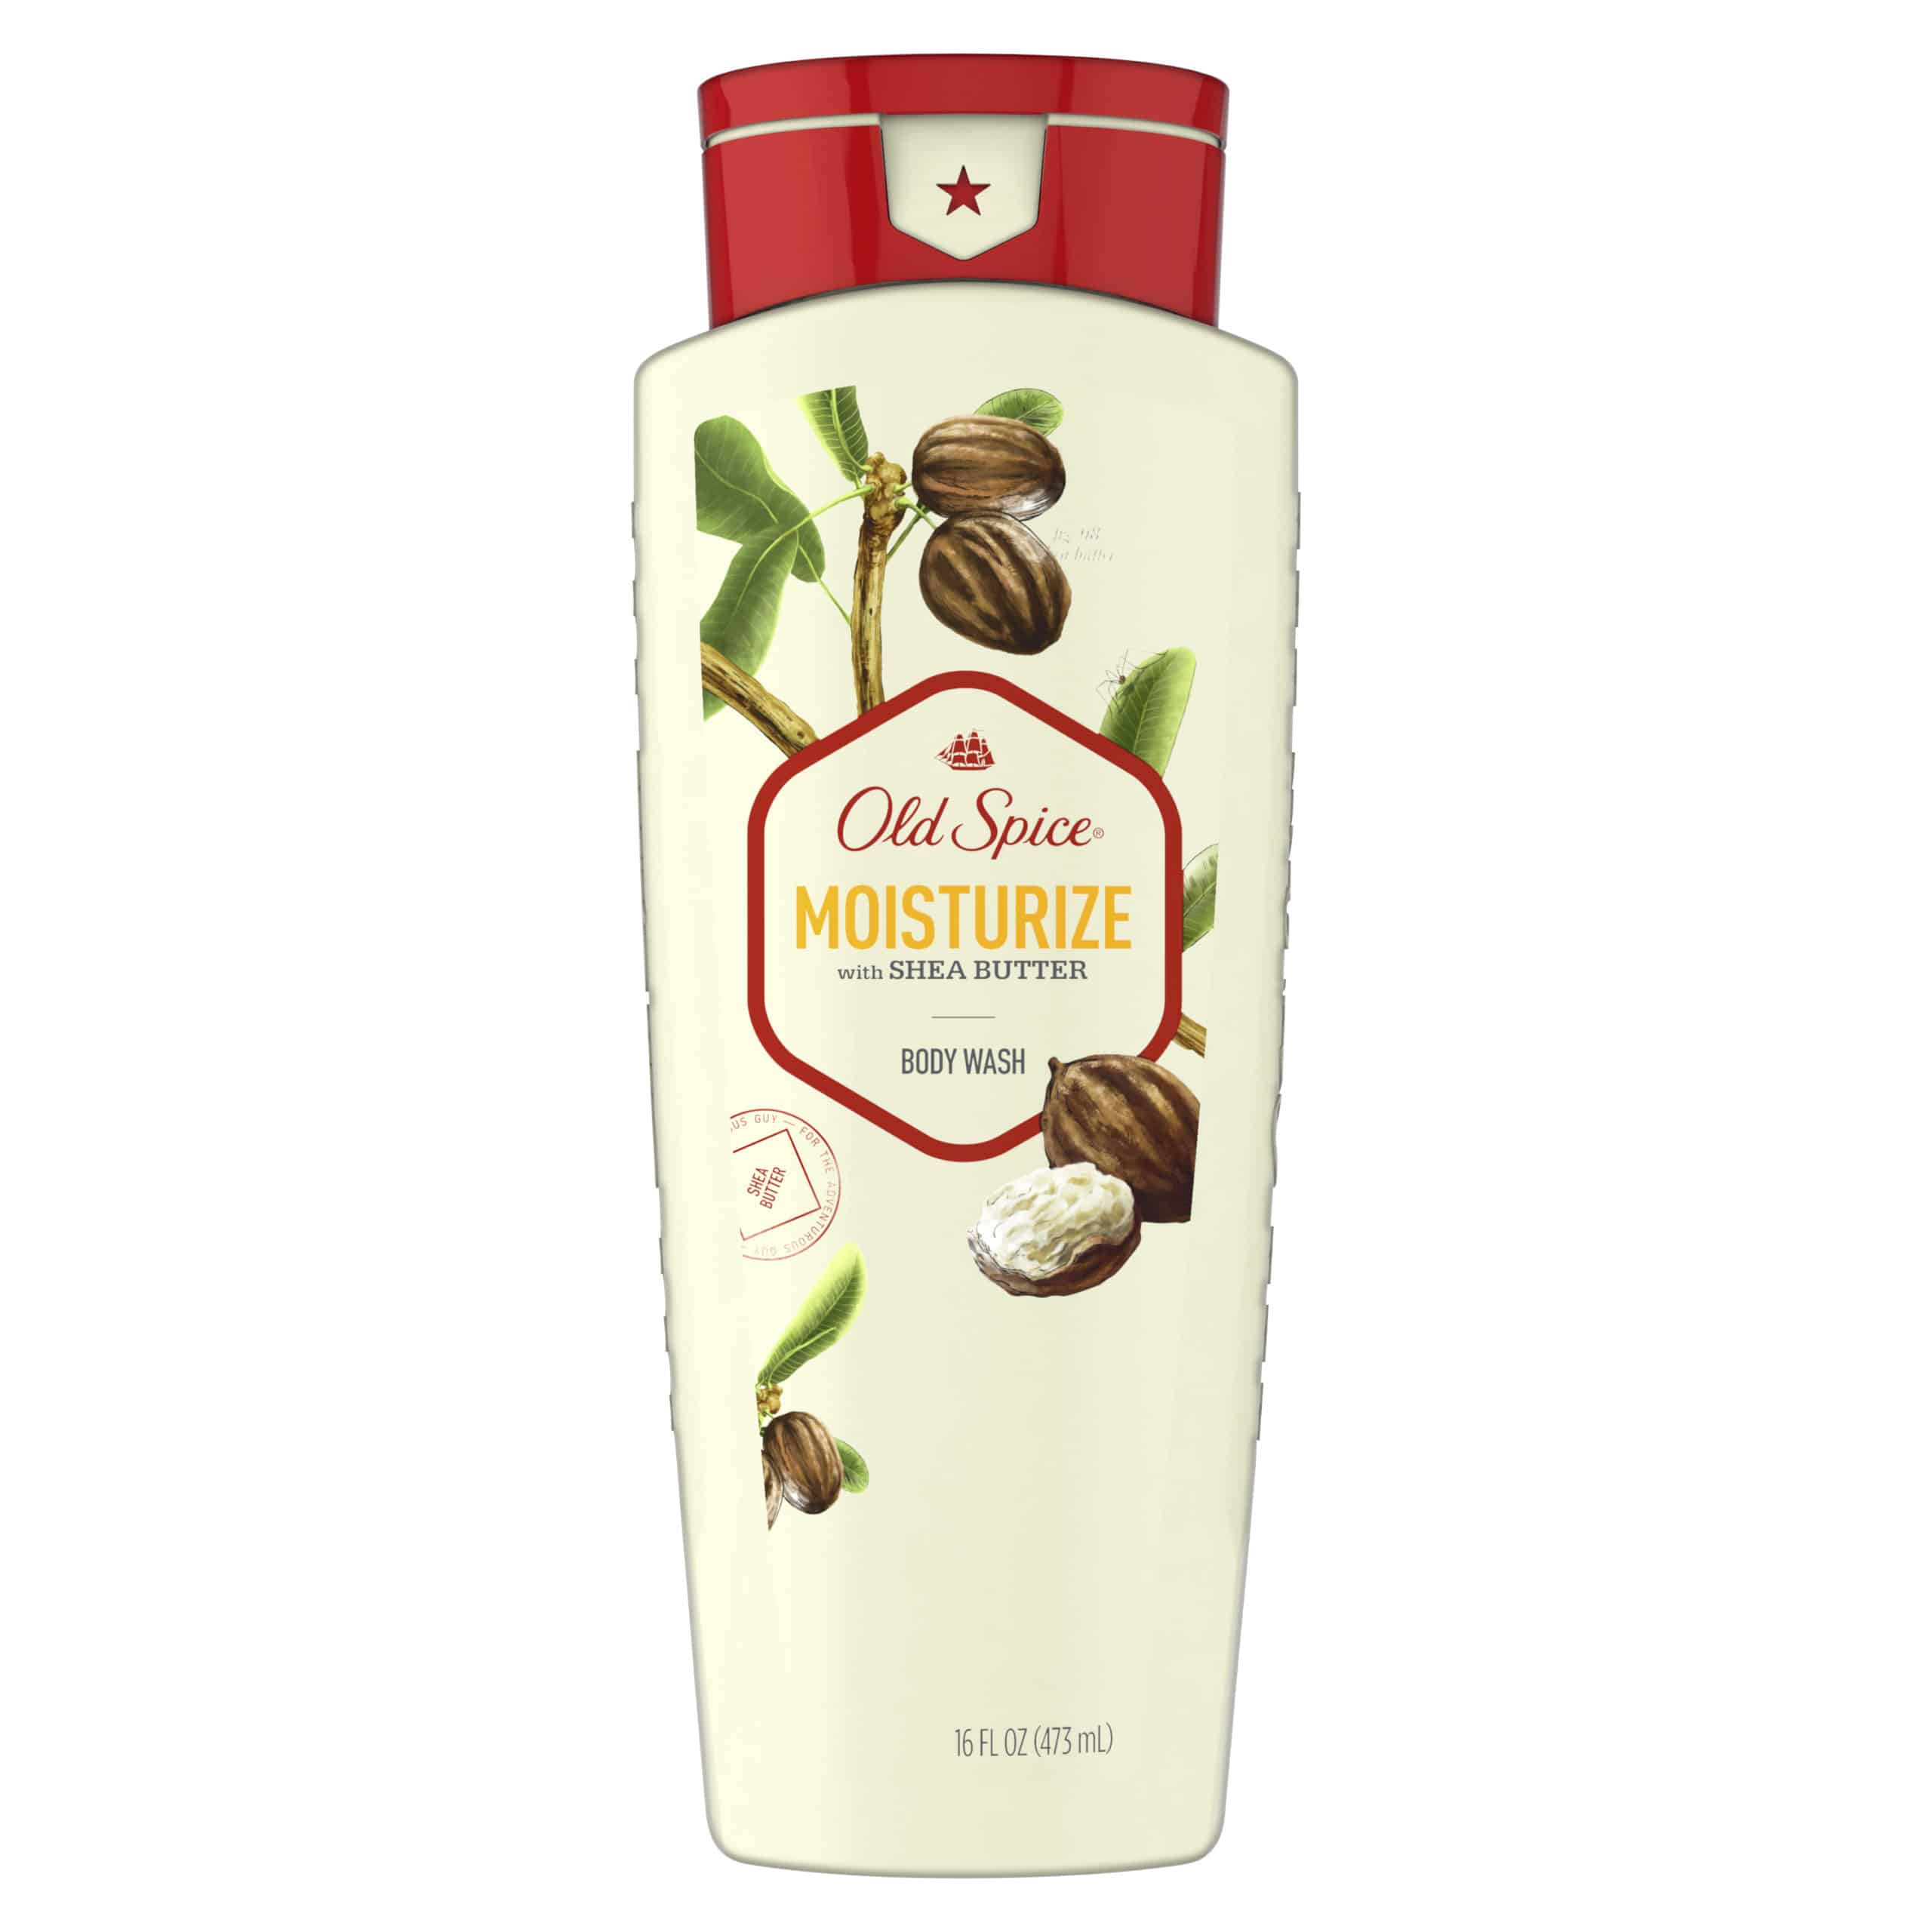 Old Spice Body Wash for Men Moisturize with Shea Butter, 16 oz